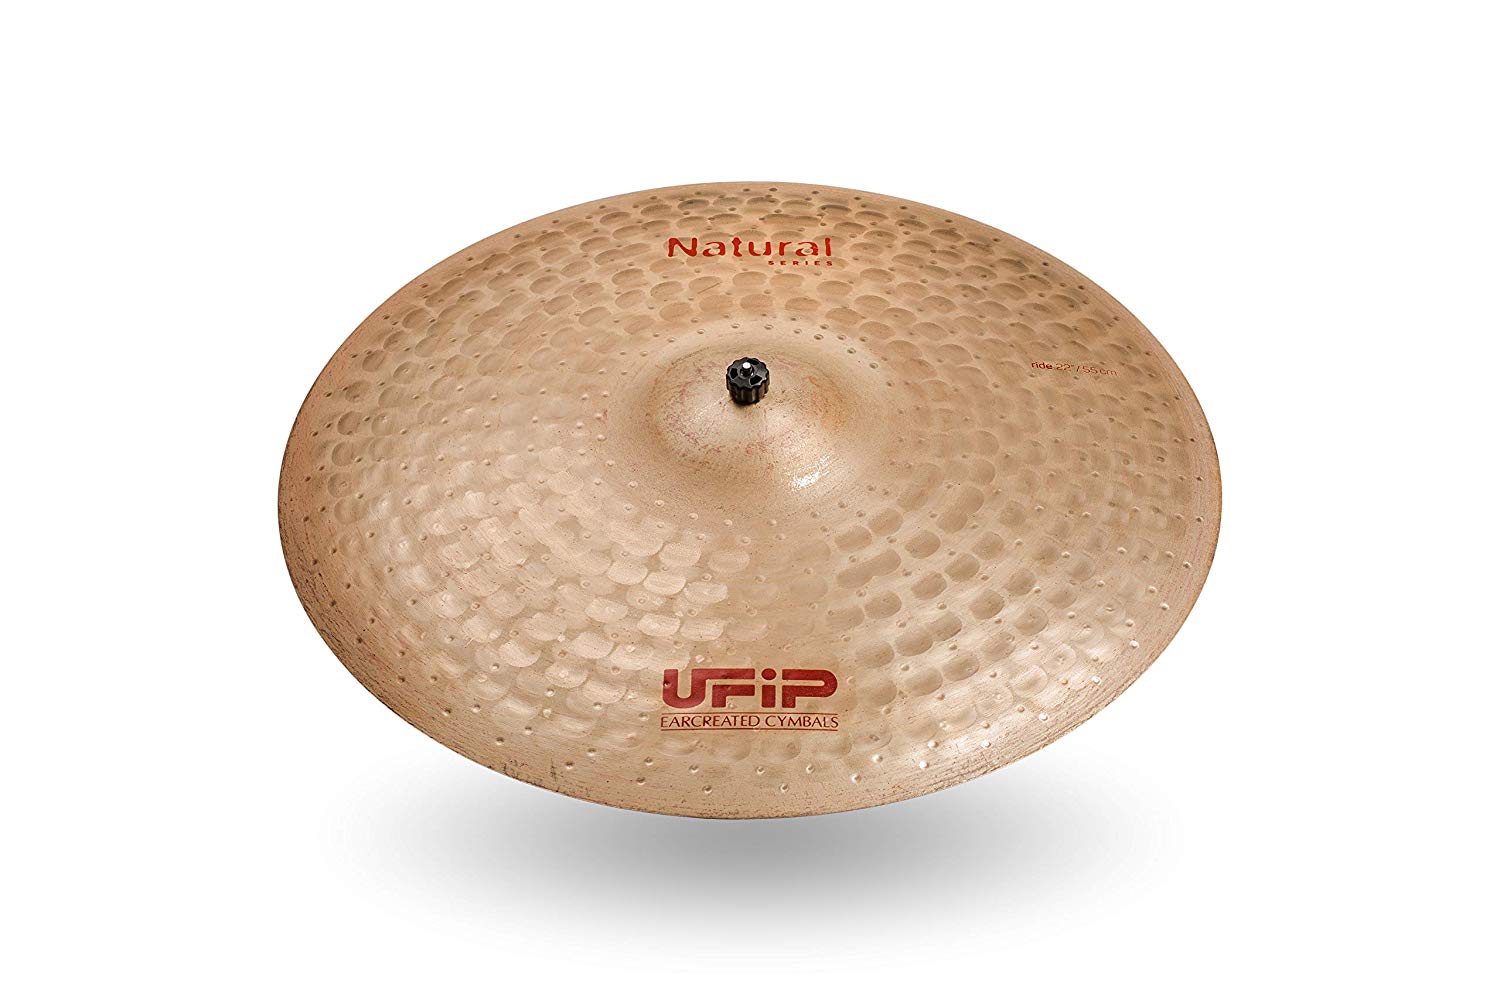 Ufip NS-22RV Natural Series 22" Sizzle Ride Cymbal